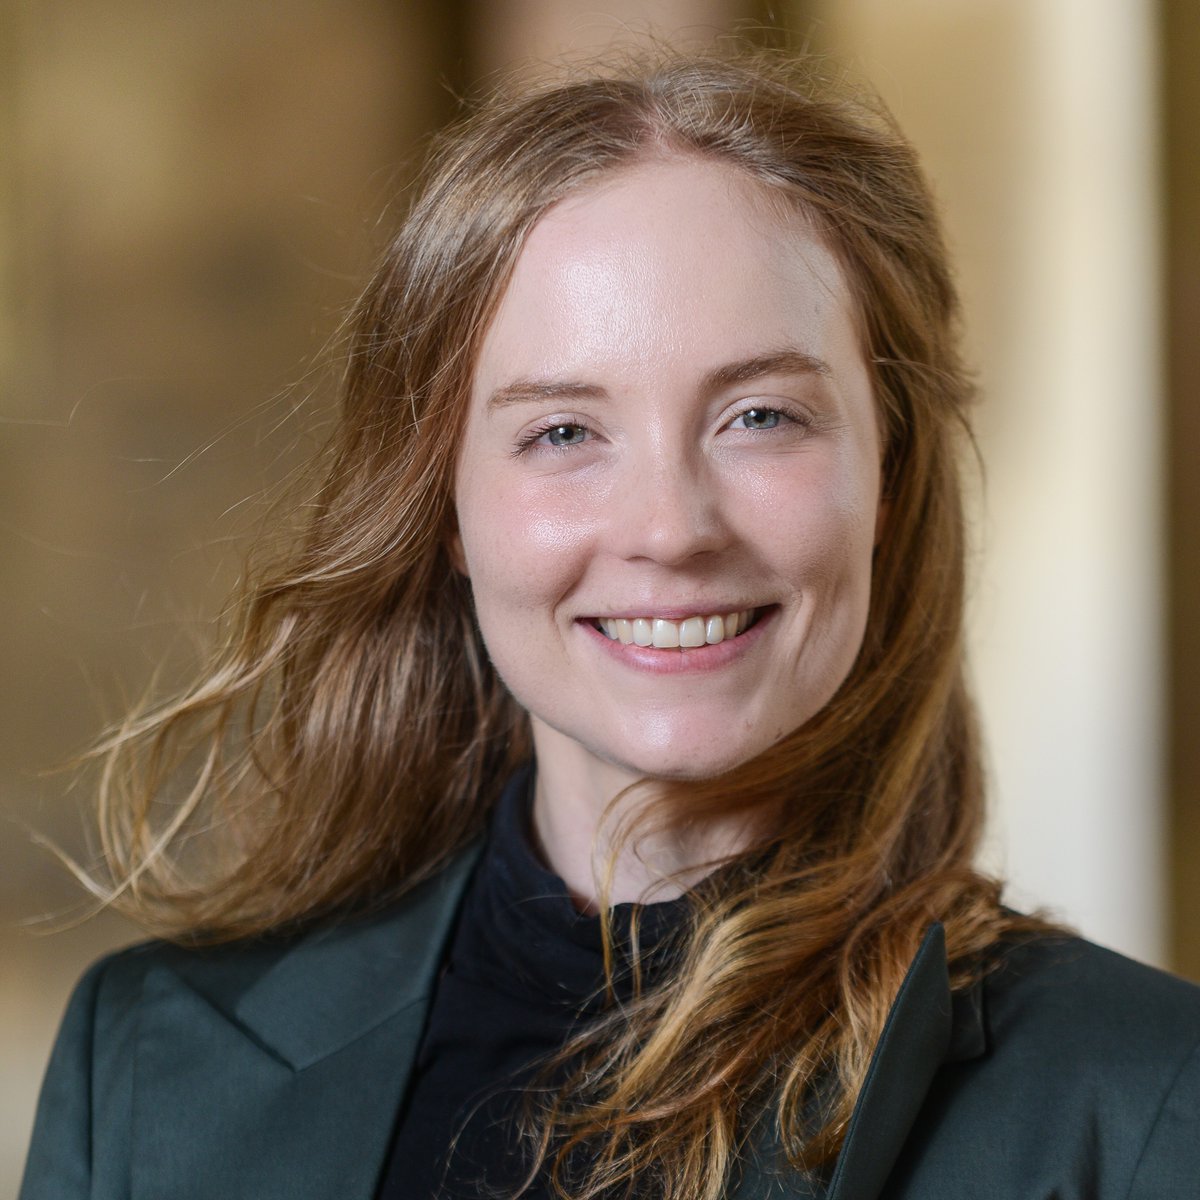 Congratulations to @elise_needham who was been awarded a Fellowship from the Royal Commission for the Exhibition of 1851! 🎉
She aims to determine genetic influences on cellular signalling by performing genome-wide association studies on protein post-translational modifications.